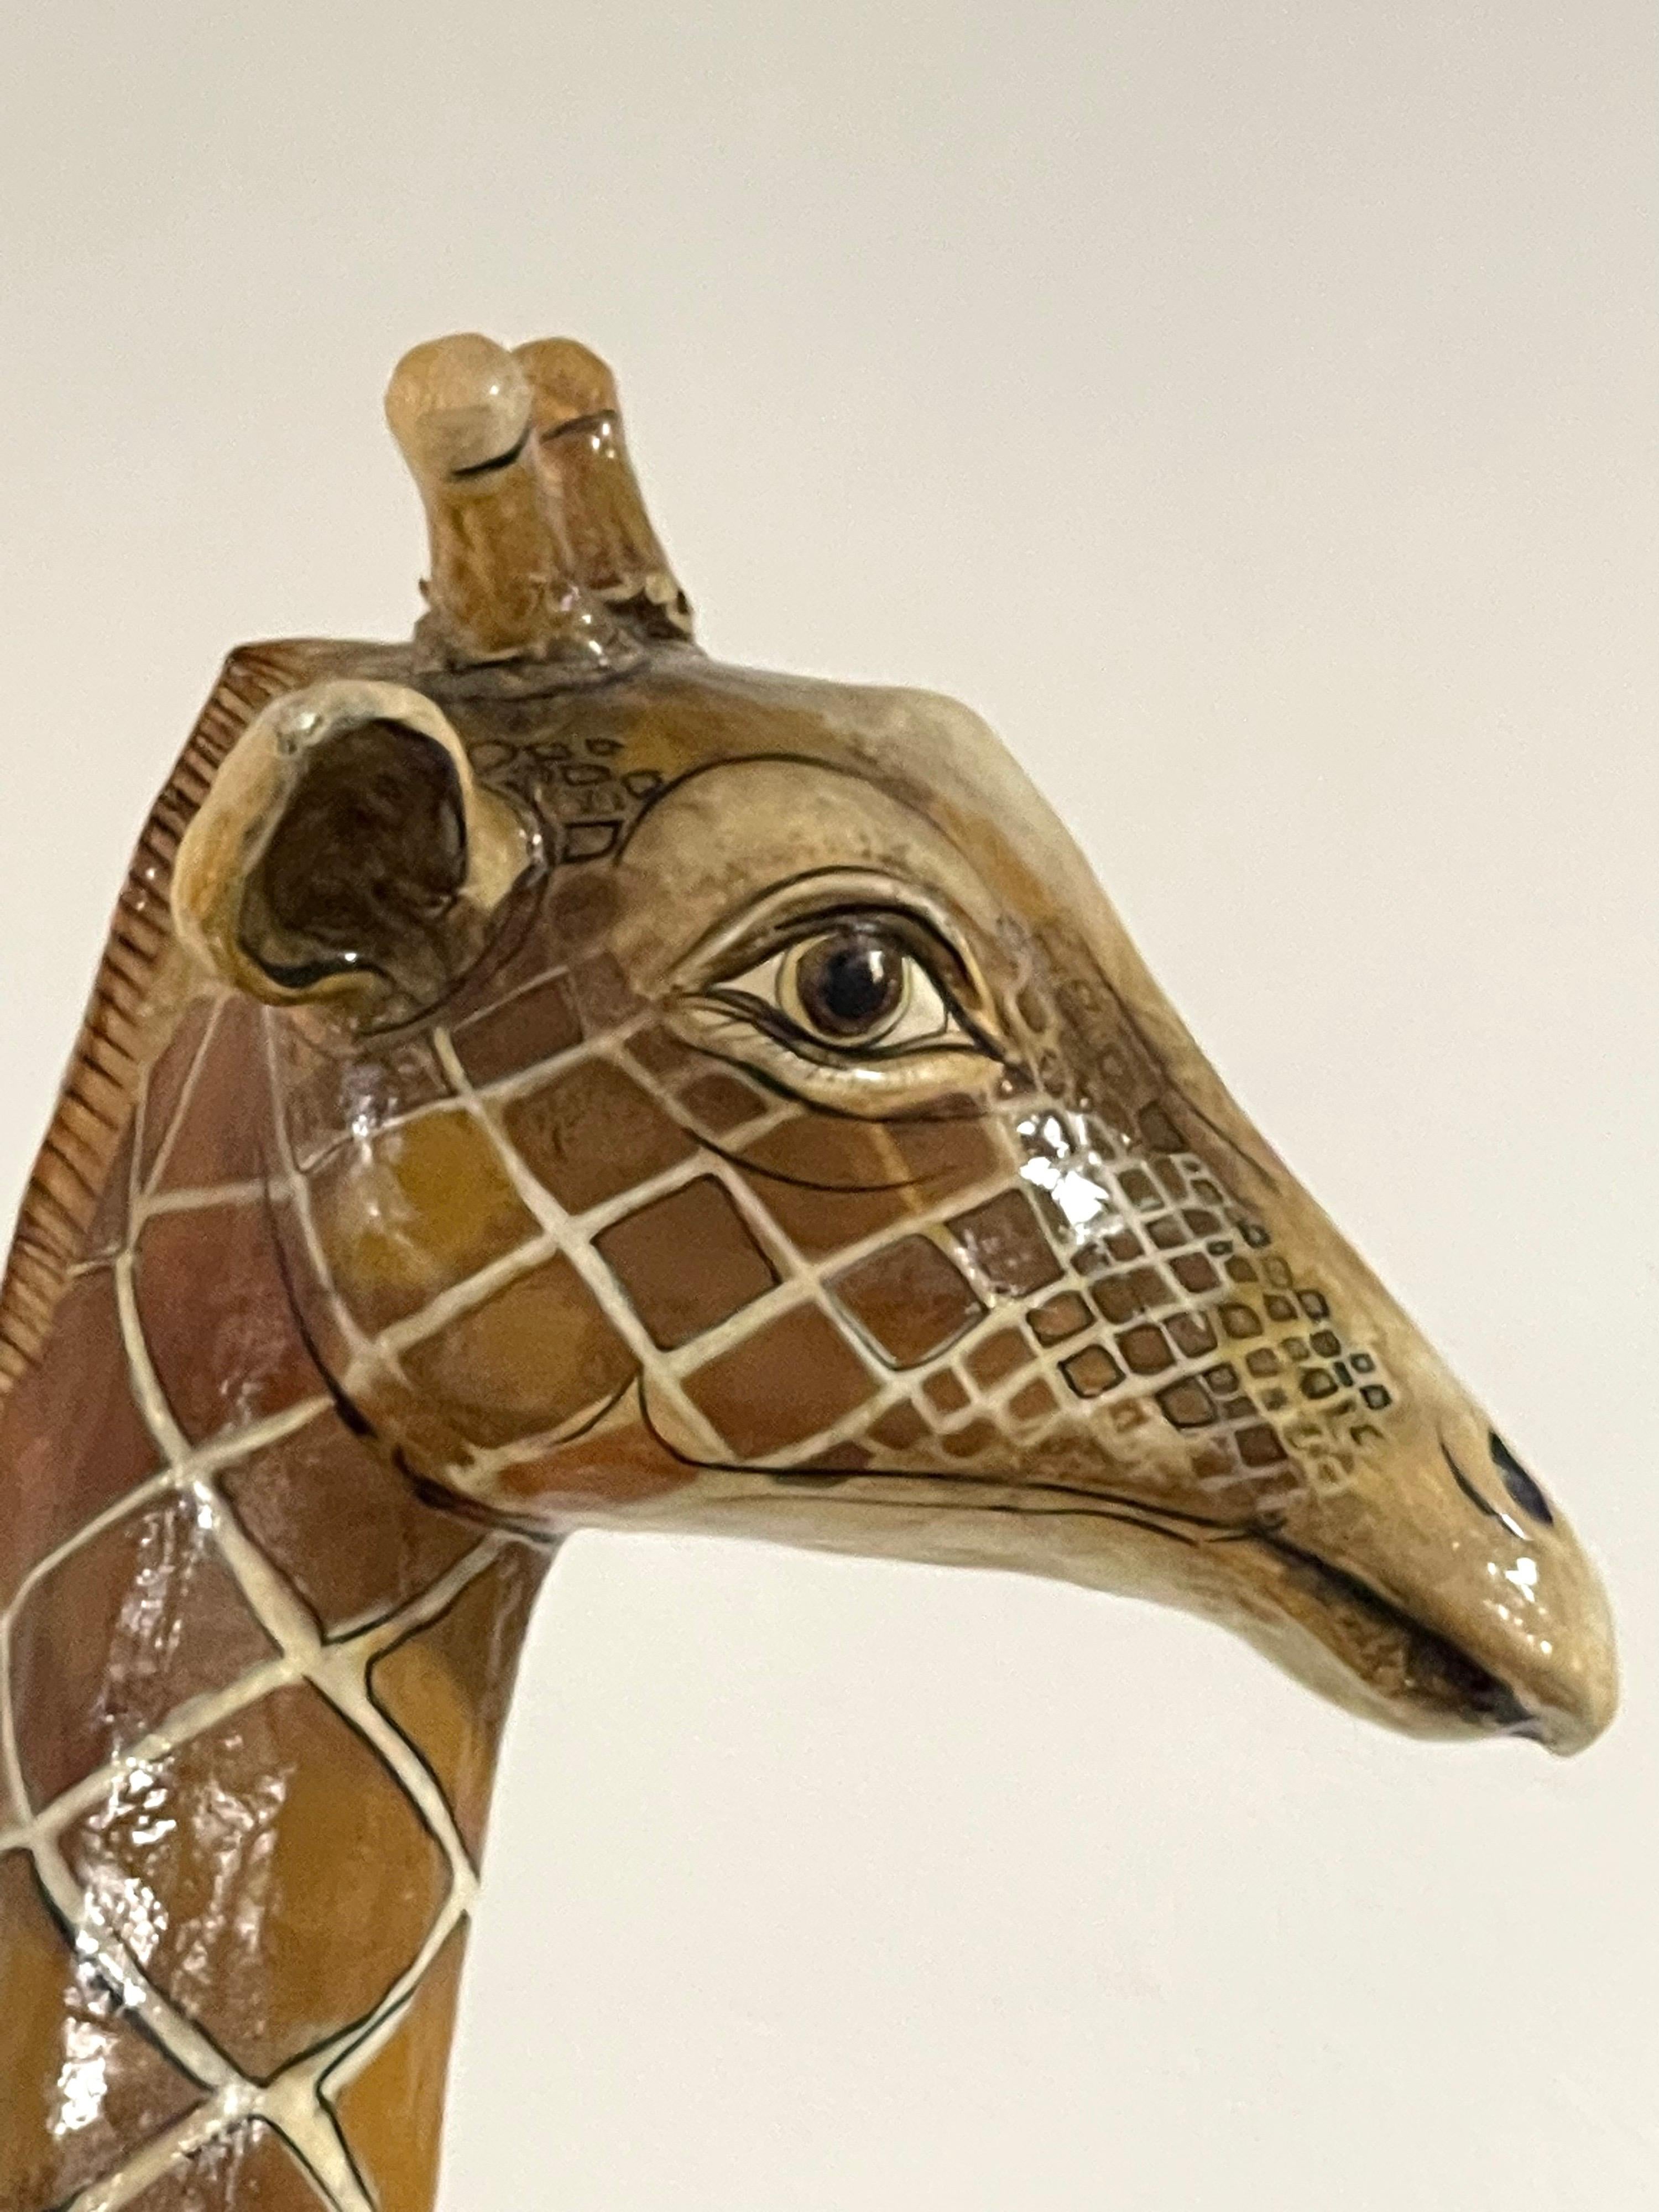 A beautiful large twin headed Papier Mache giraffe sculpture by Sergio Bustamante from 1977. Comes with a copy of a certificate from Bustamante himself dated June 6, 1977. In good condition with a minor small crease on the underside of the